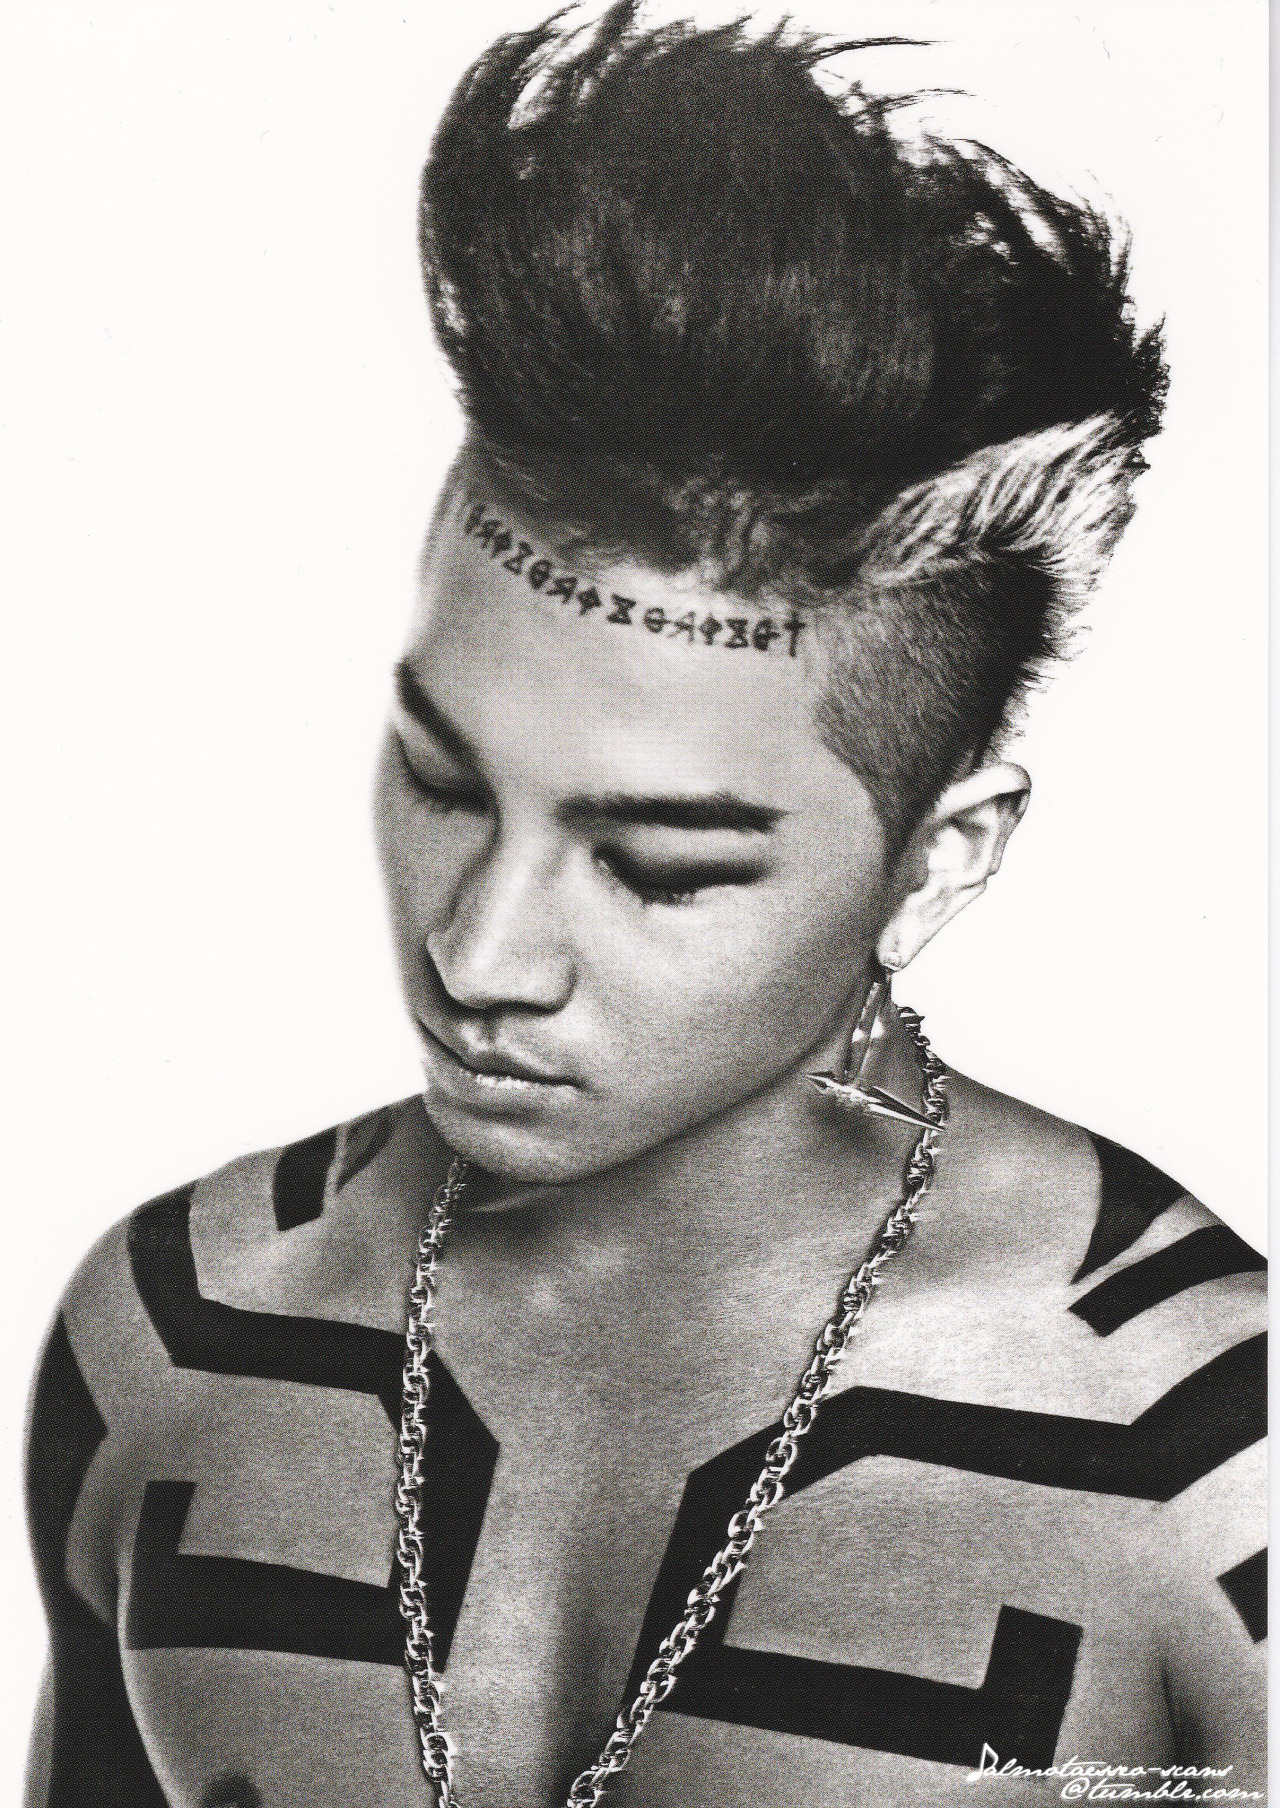 {HQ Scan} TaeYang’s RISE + best collection Vinyl LP photos -6- 
credit&#160;: jalmotaesseo-scans if editing! Do not repost without permission! Do not post to weheartit!